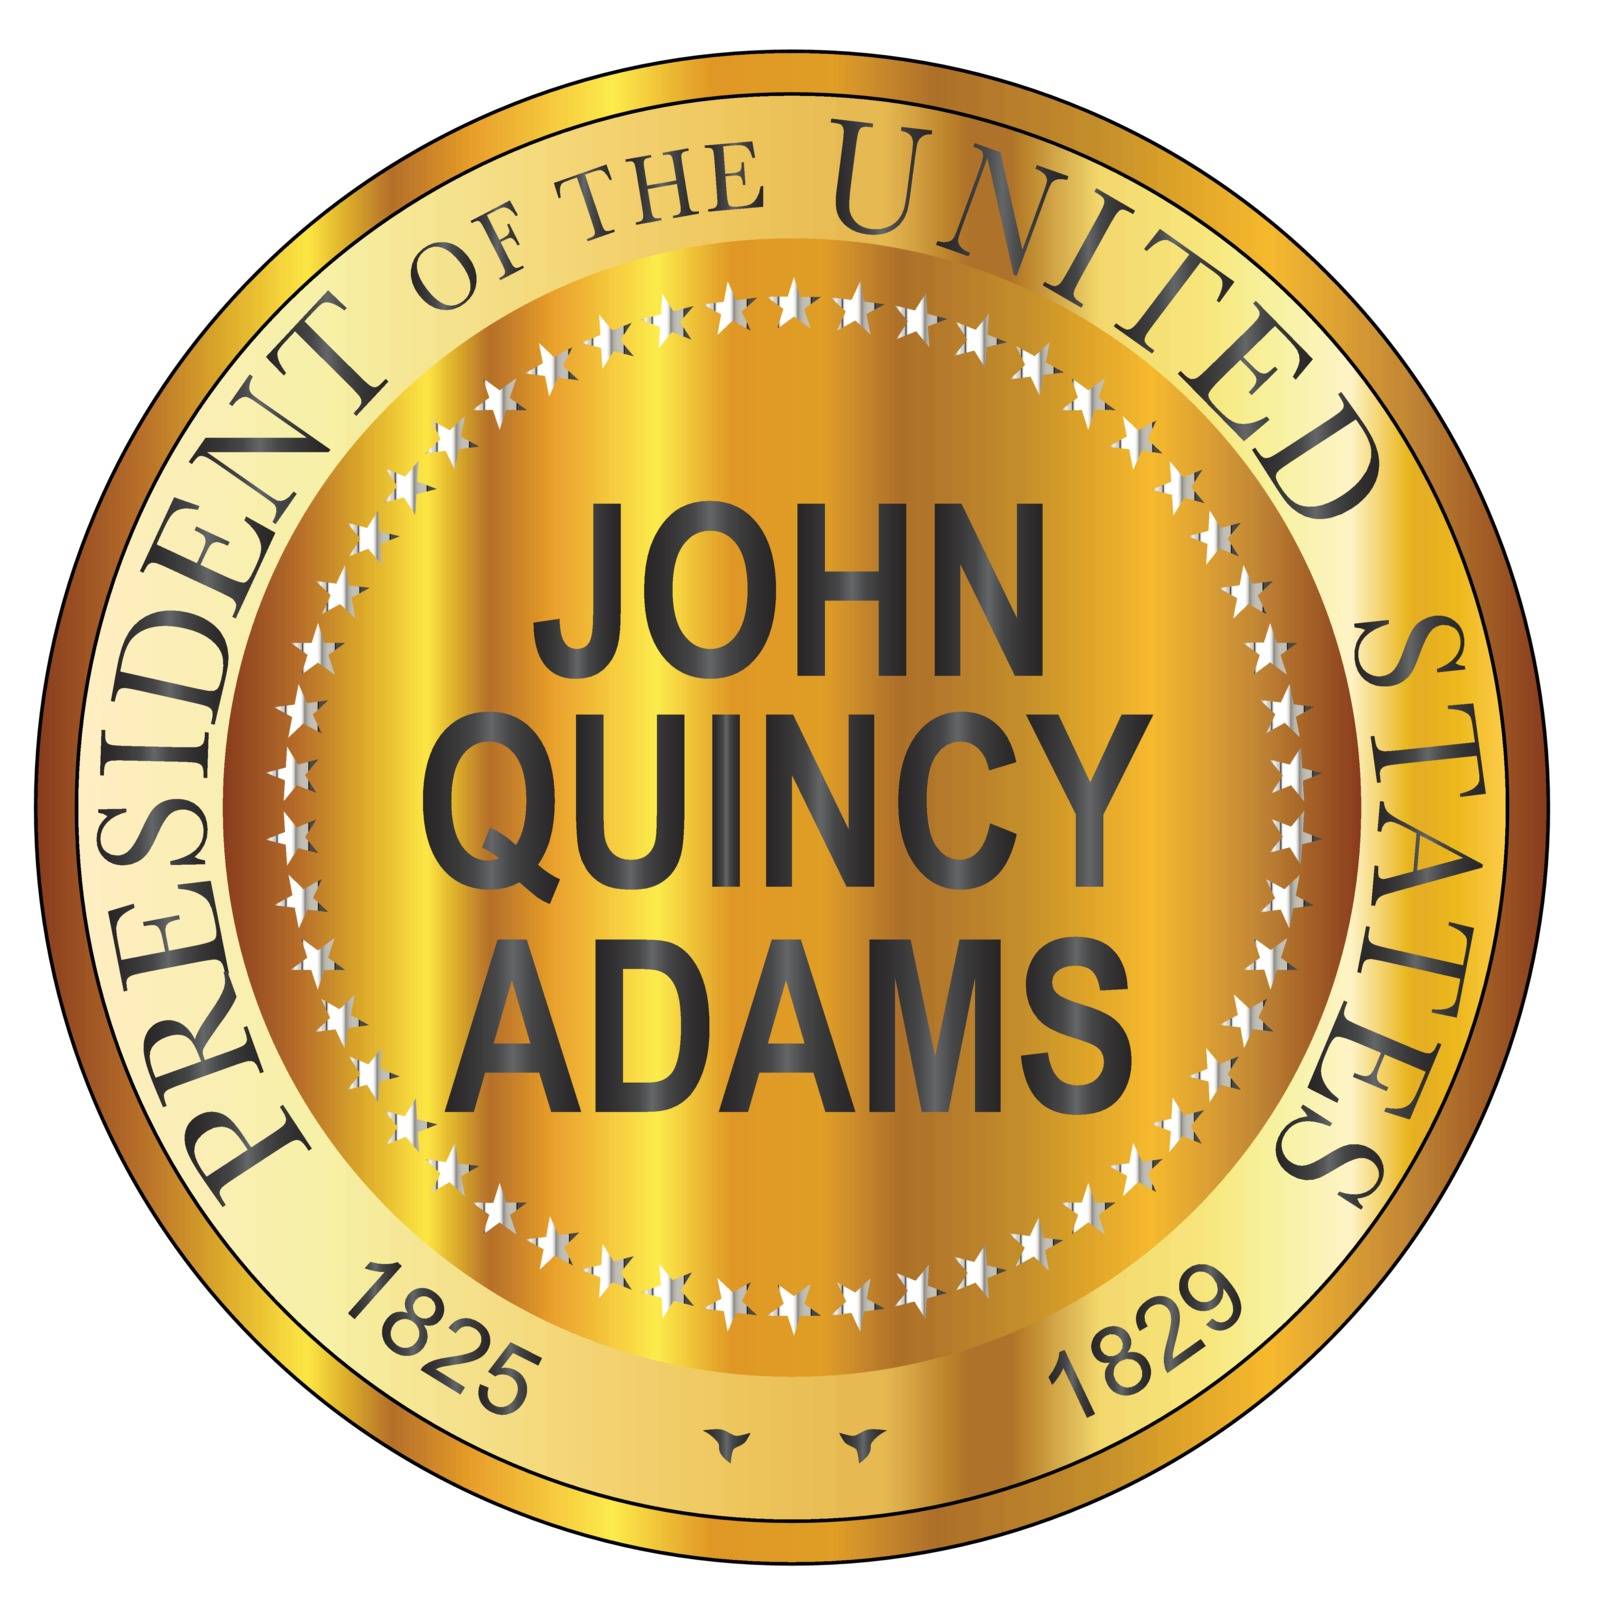 John Quincy Adams 6th president of the United States of America round stamp